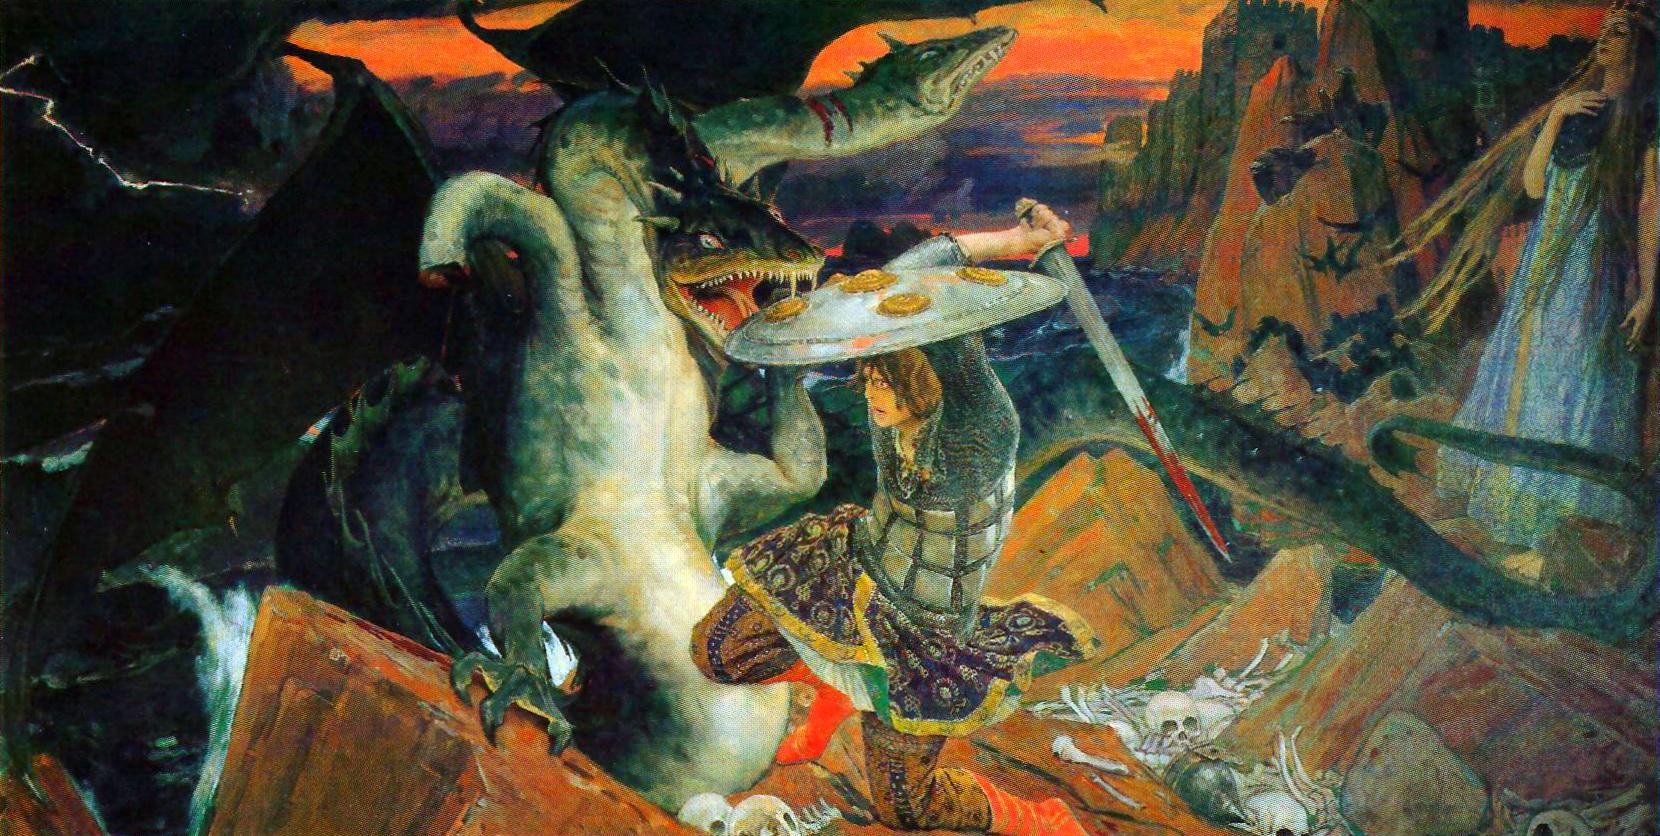 A man named Ivan shields himself in a fight with an open-mouthed dragon on a mountain while holding a bloody sword.